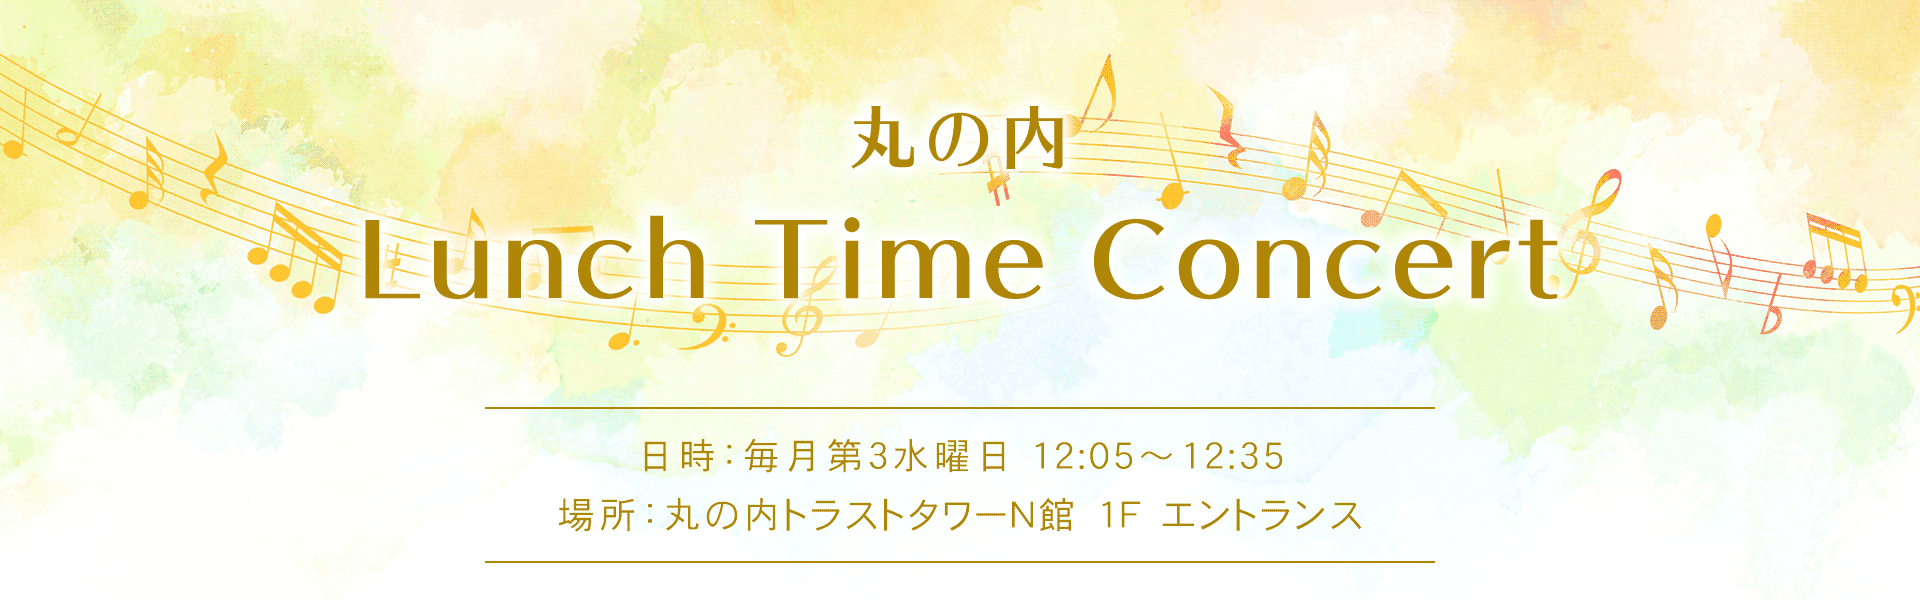 MORI TRUST LUNCH TIME CONCERT